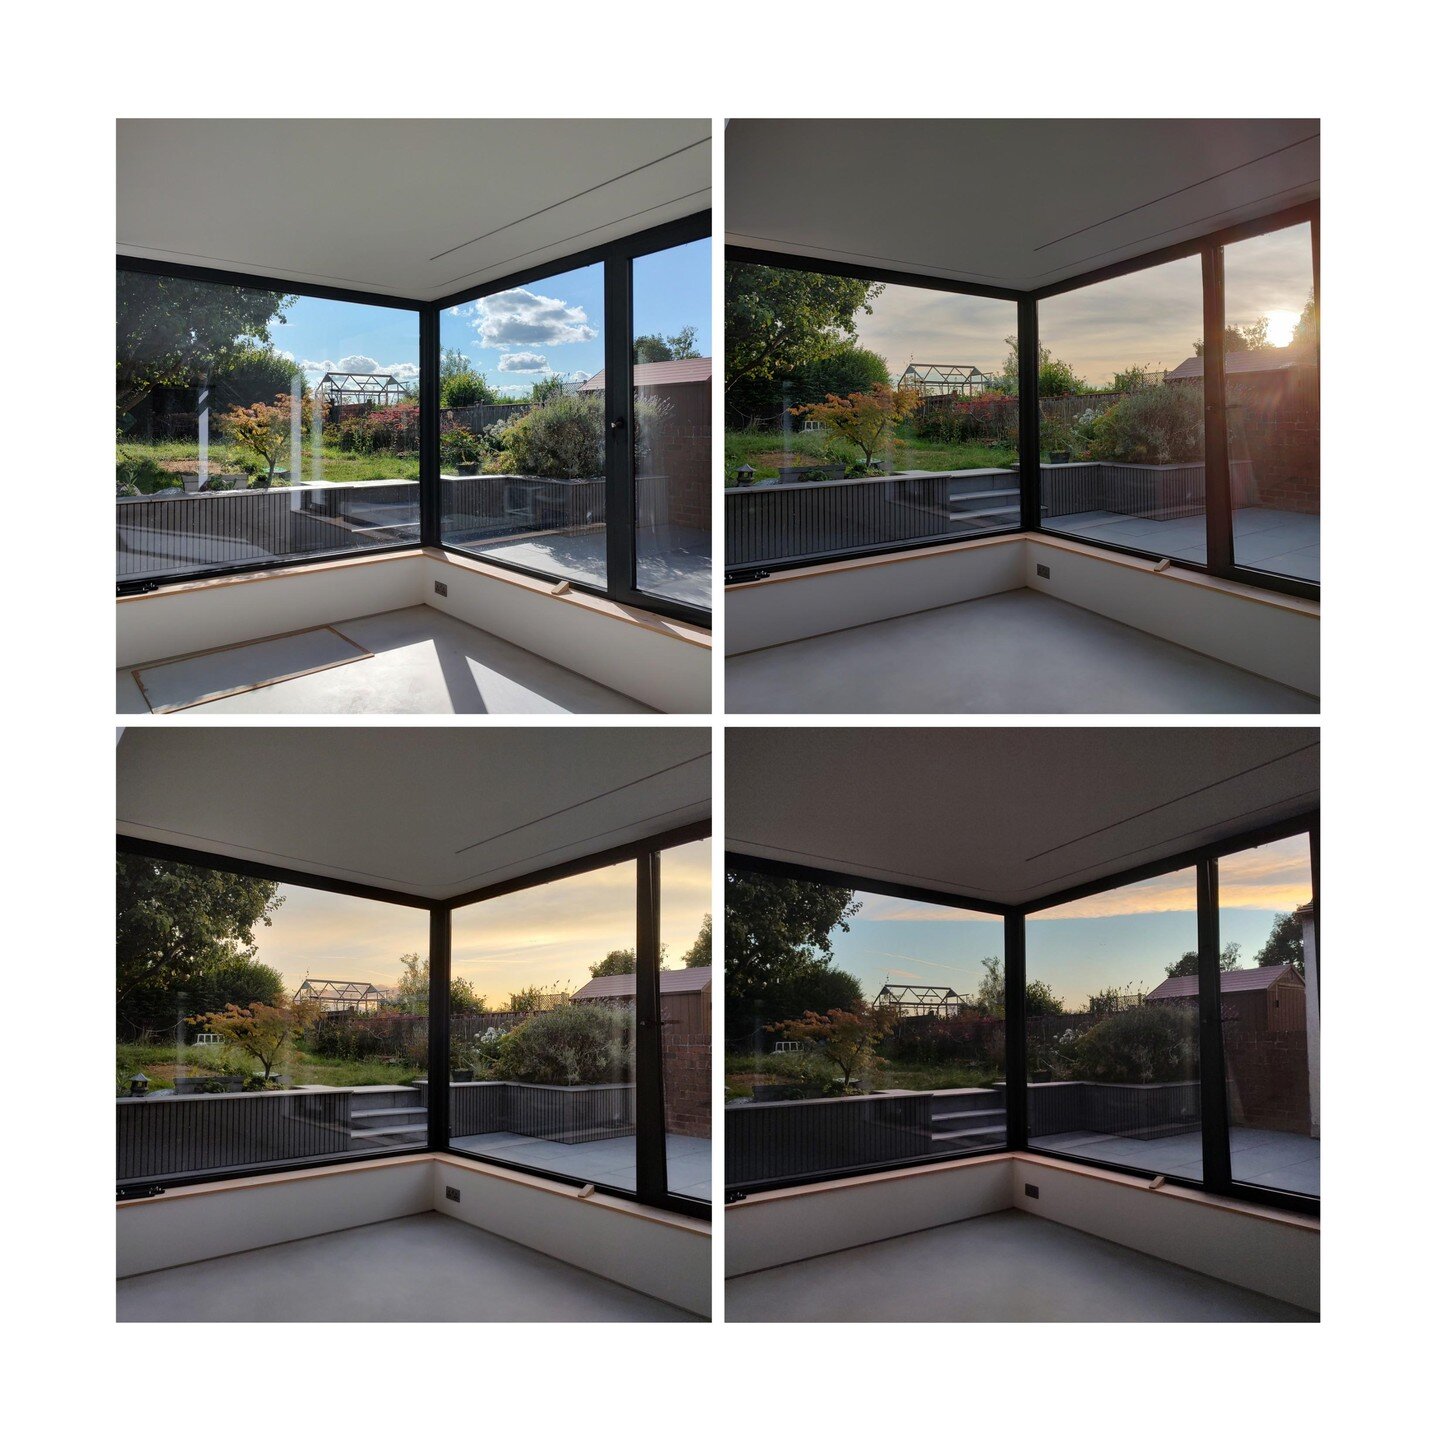 We have recently received some great photos from one of our clients in Sheffield whose project is nearing completion.

They have captured the changing of light as the sun sets from a view within their extension. 

The corner window creates a panorami